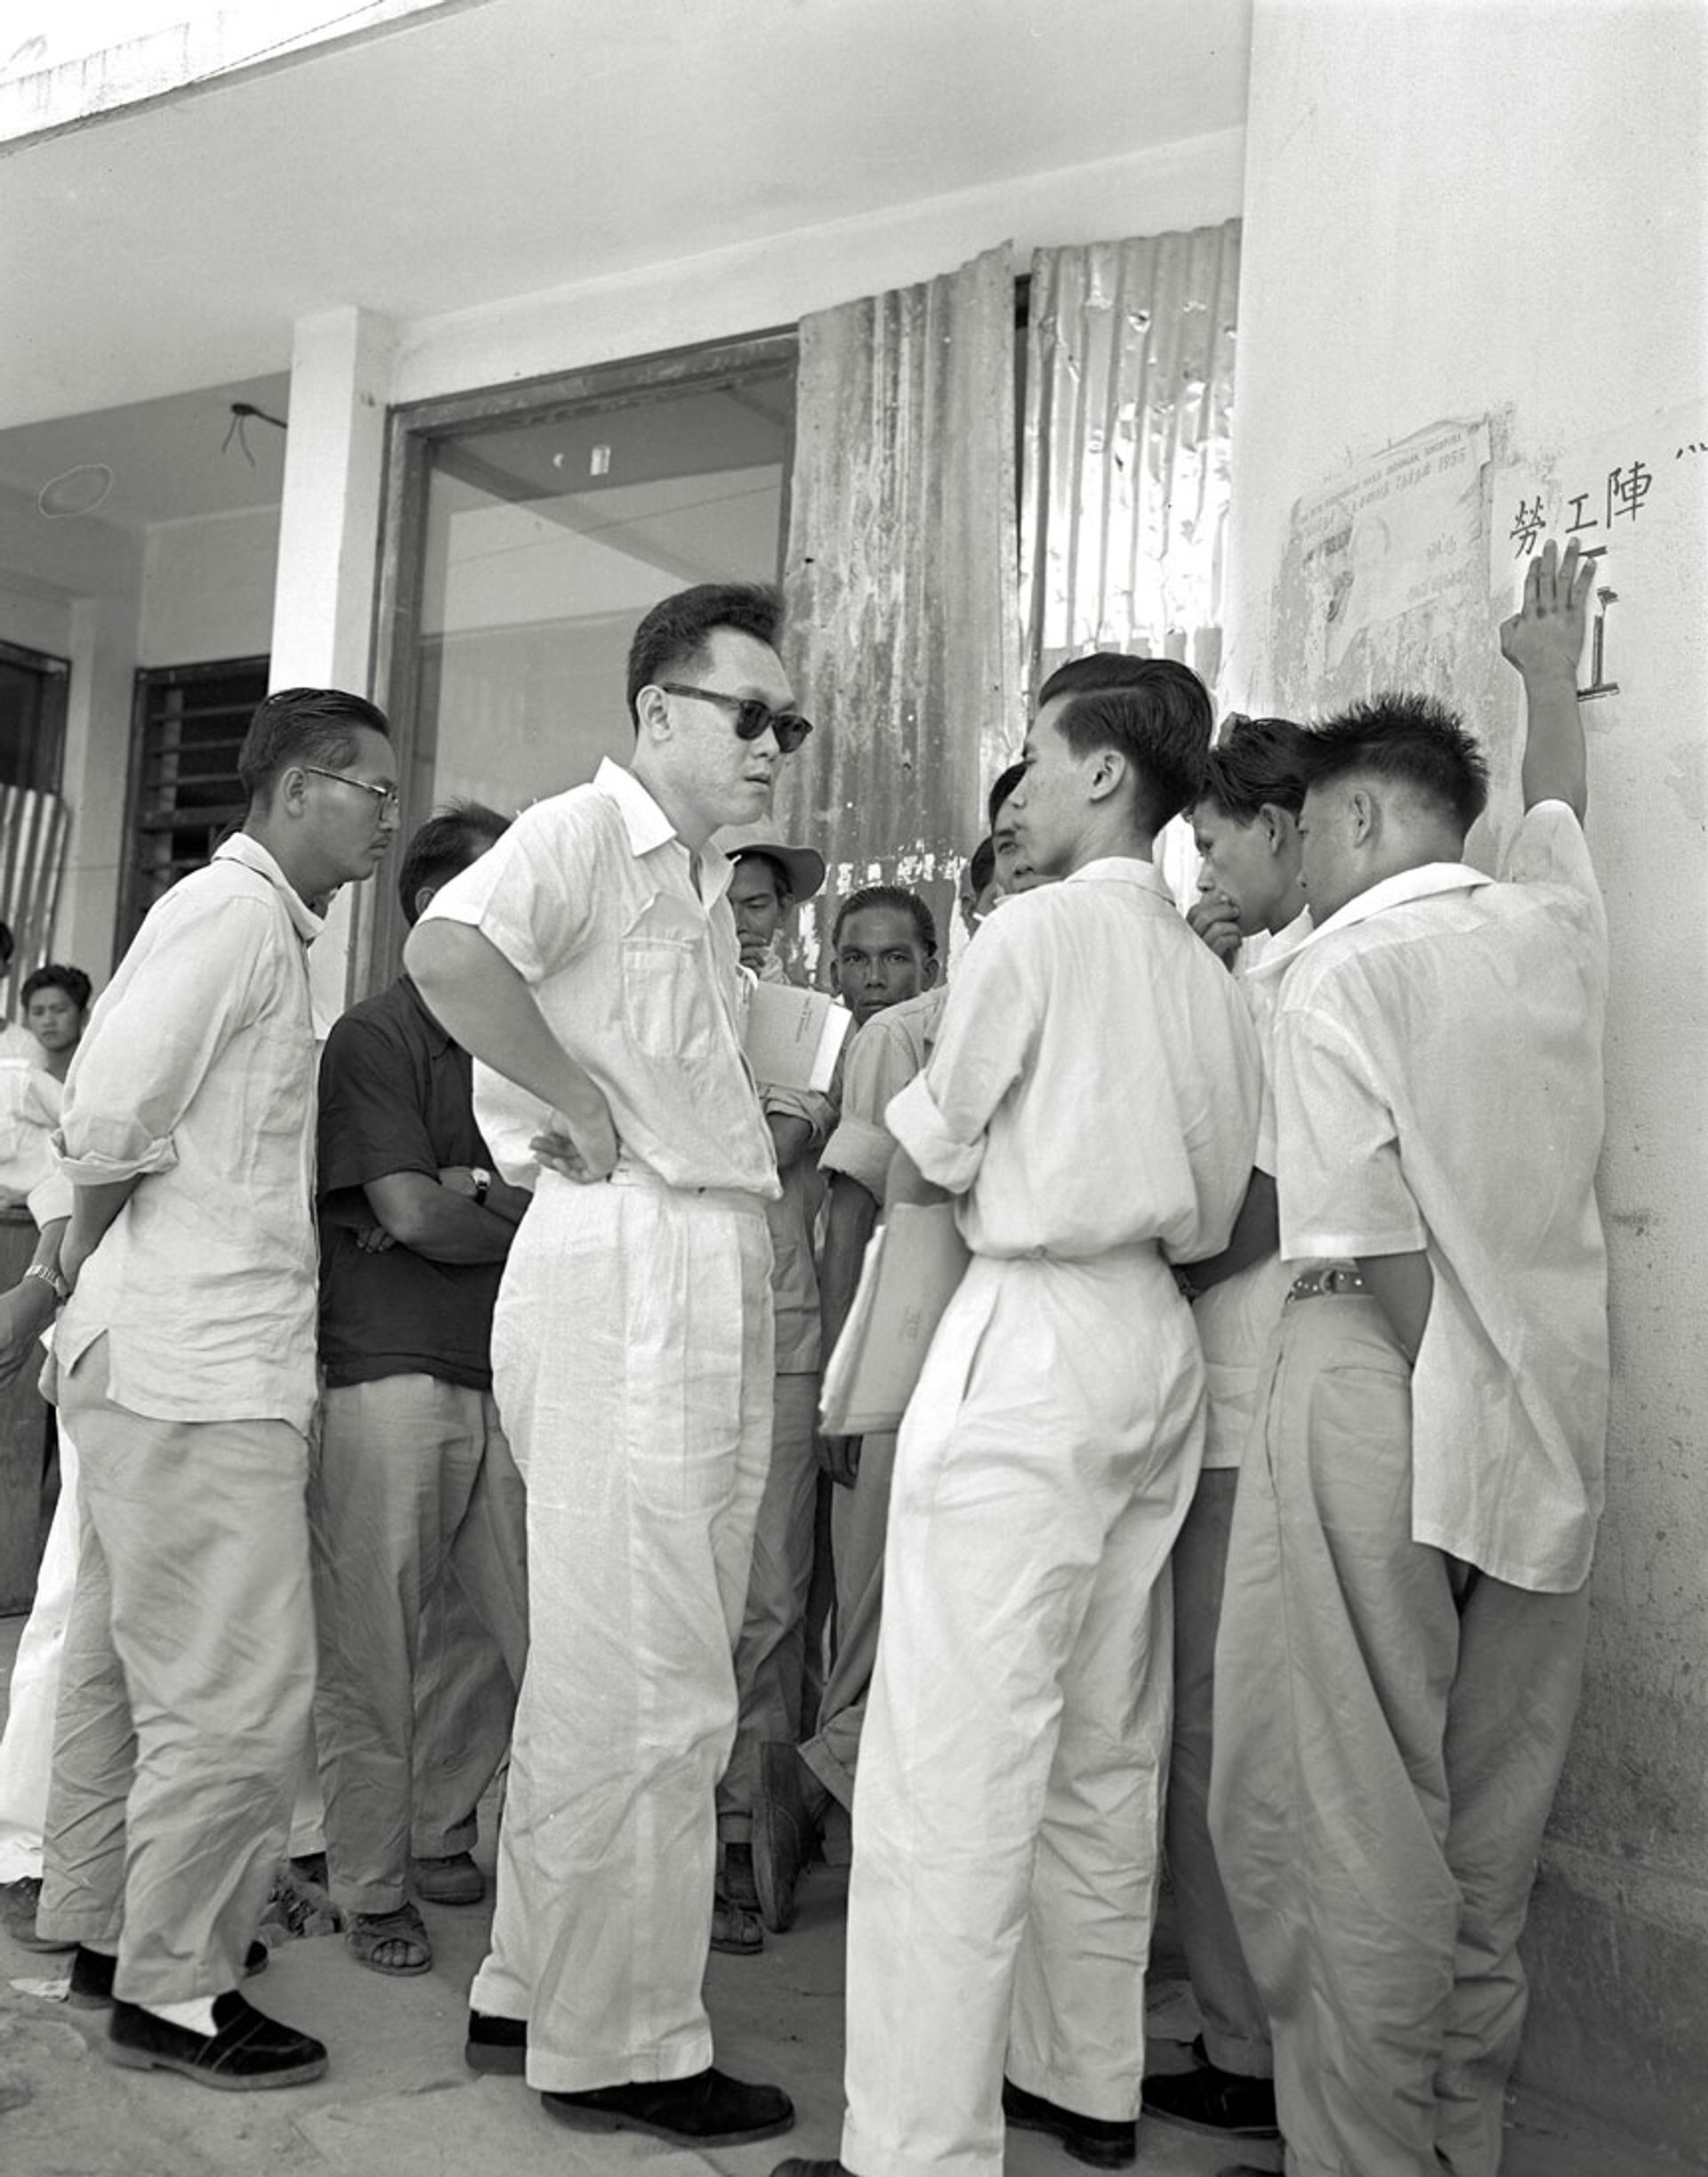 Mr Lee (in sunglasses) was legal adviser to the Singapore Bus Workers’ Union when it went on strike in April 1955. He is seen here with the union’s leader, Mr Lim Chin Siong (facing Mr Lee), on May 4. The workers had gone against Mr Lee’s advice and called the strike before their 14-day notice of a strike had expired. ST Photo: N.J. Cotterell